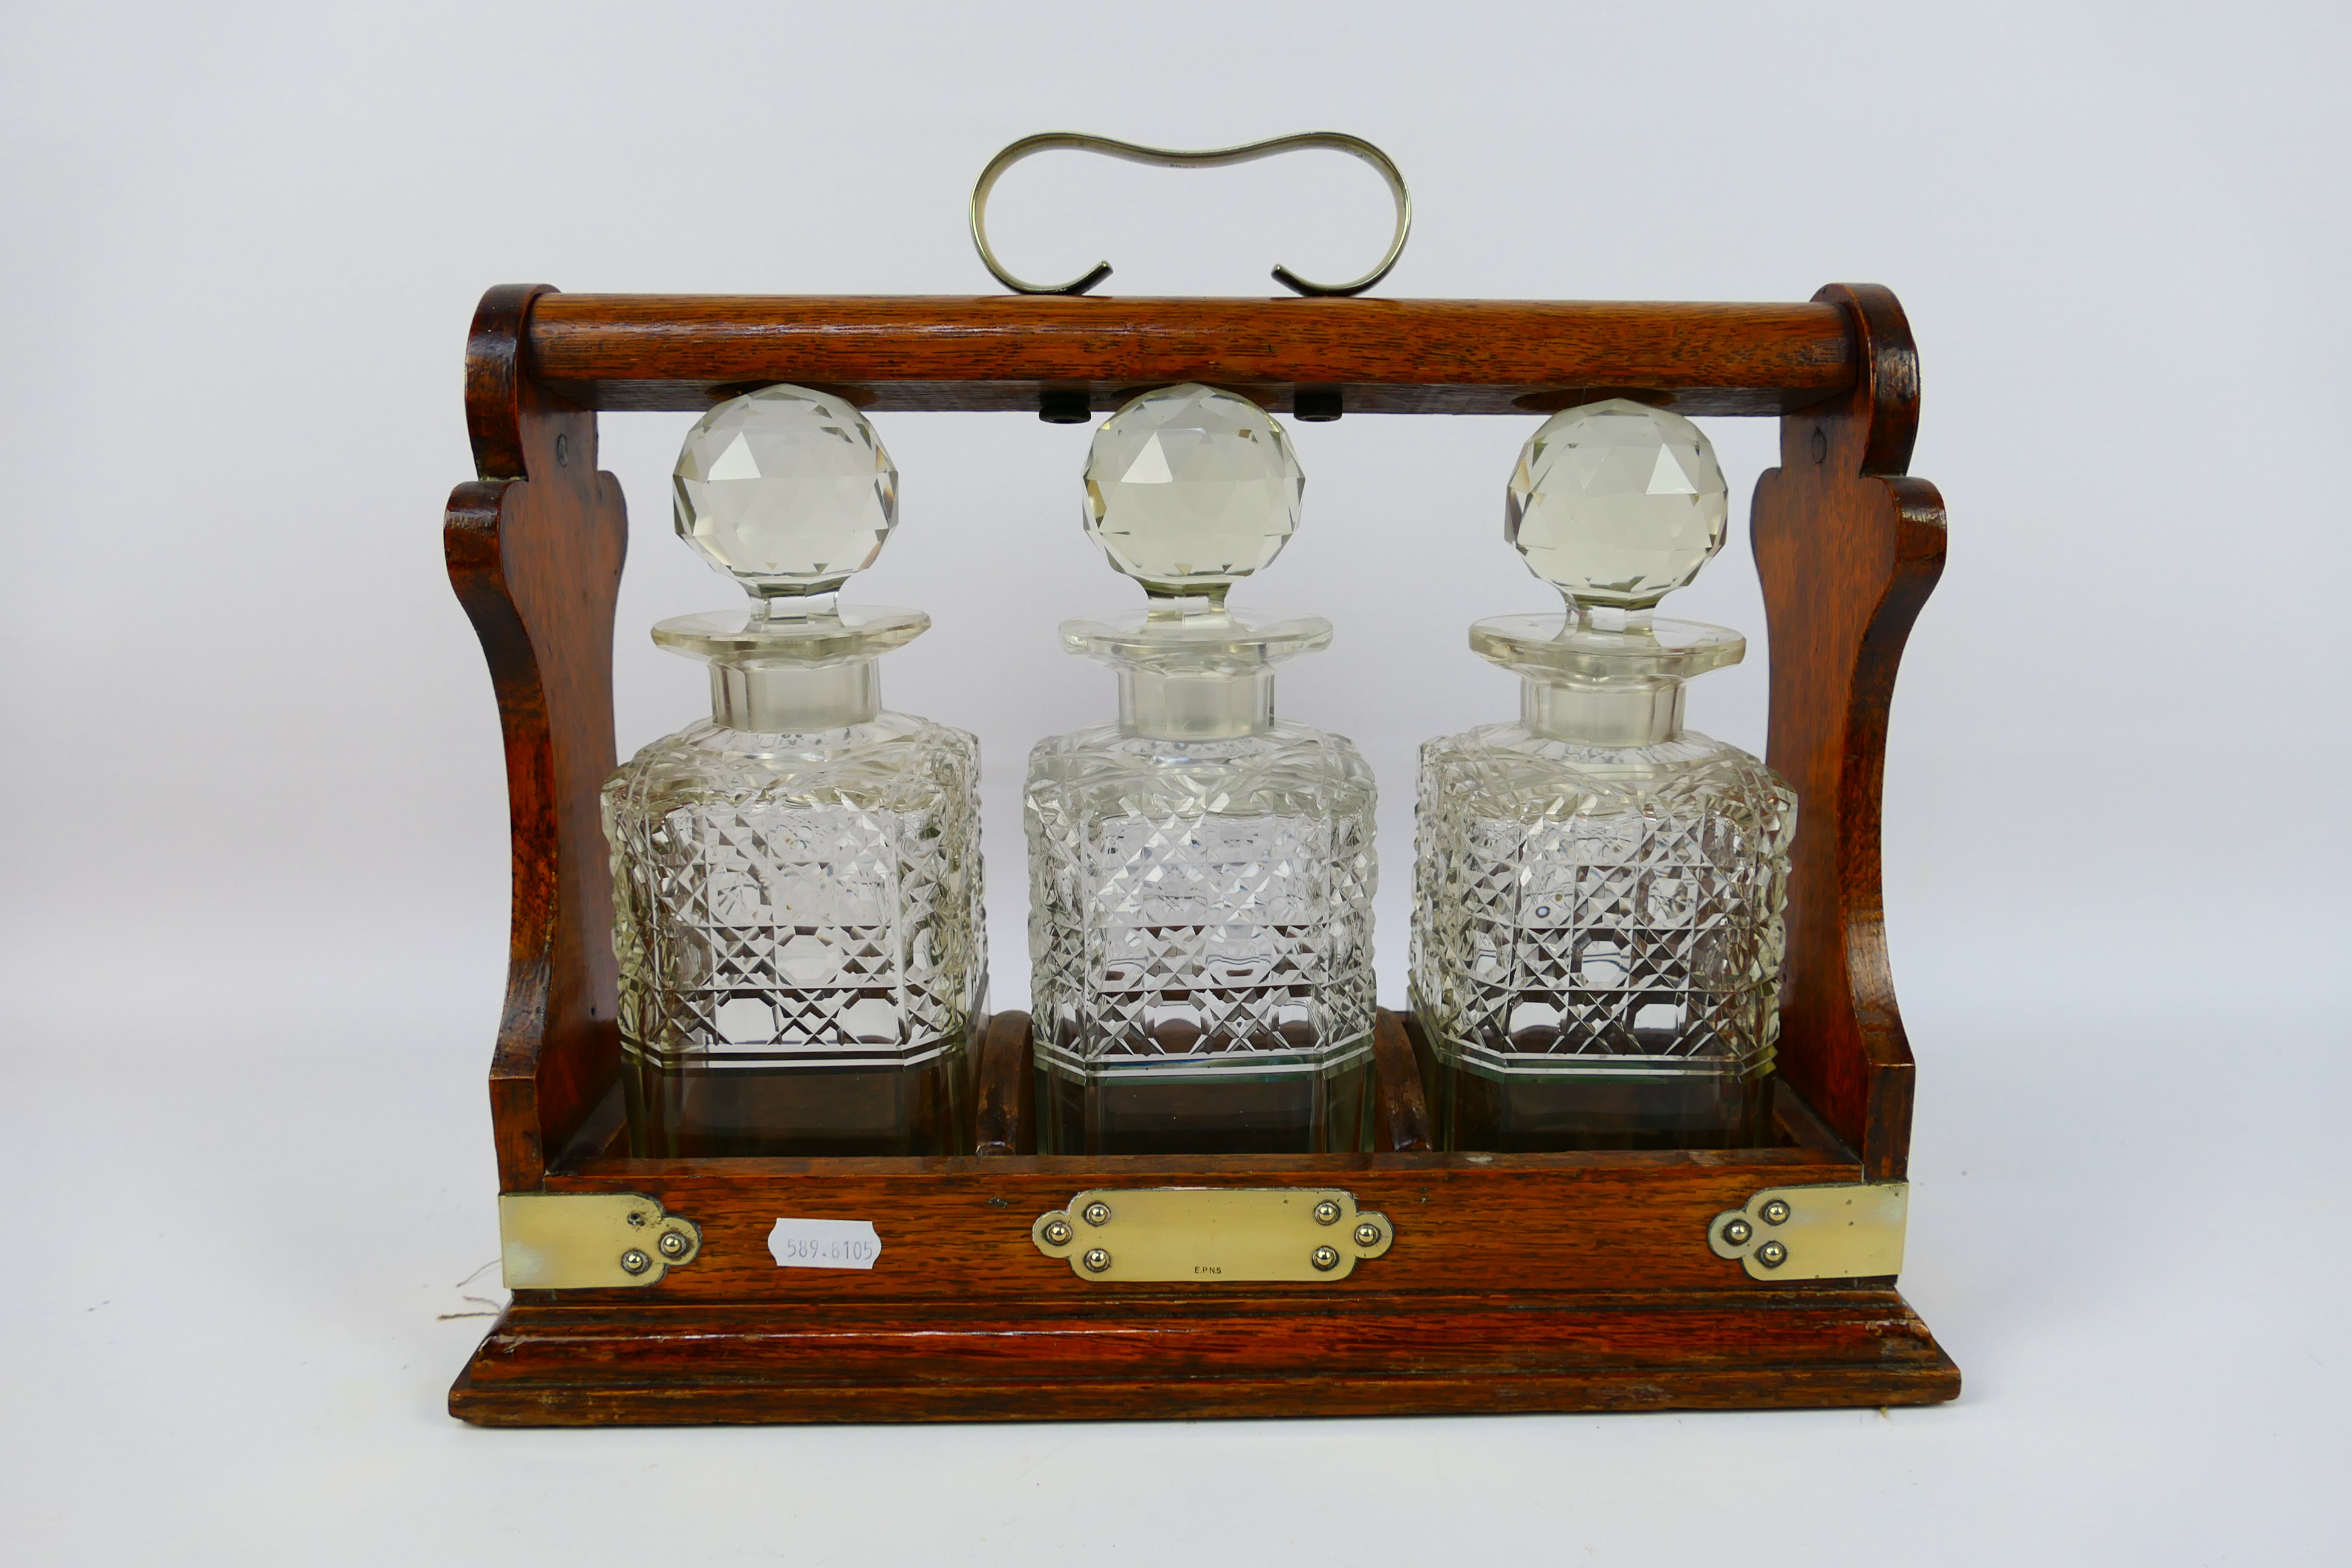 A three decanter oak tantalus with plated mounts, no maker's mark visible.